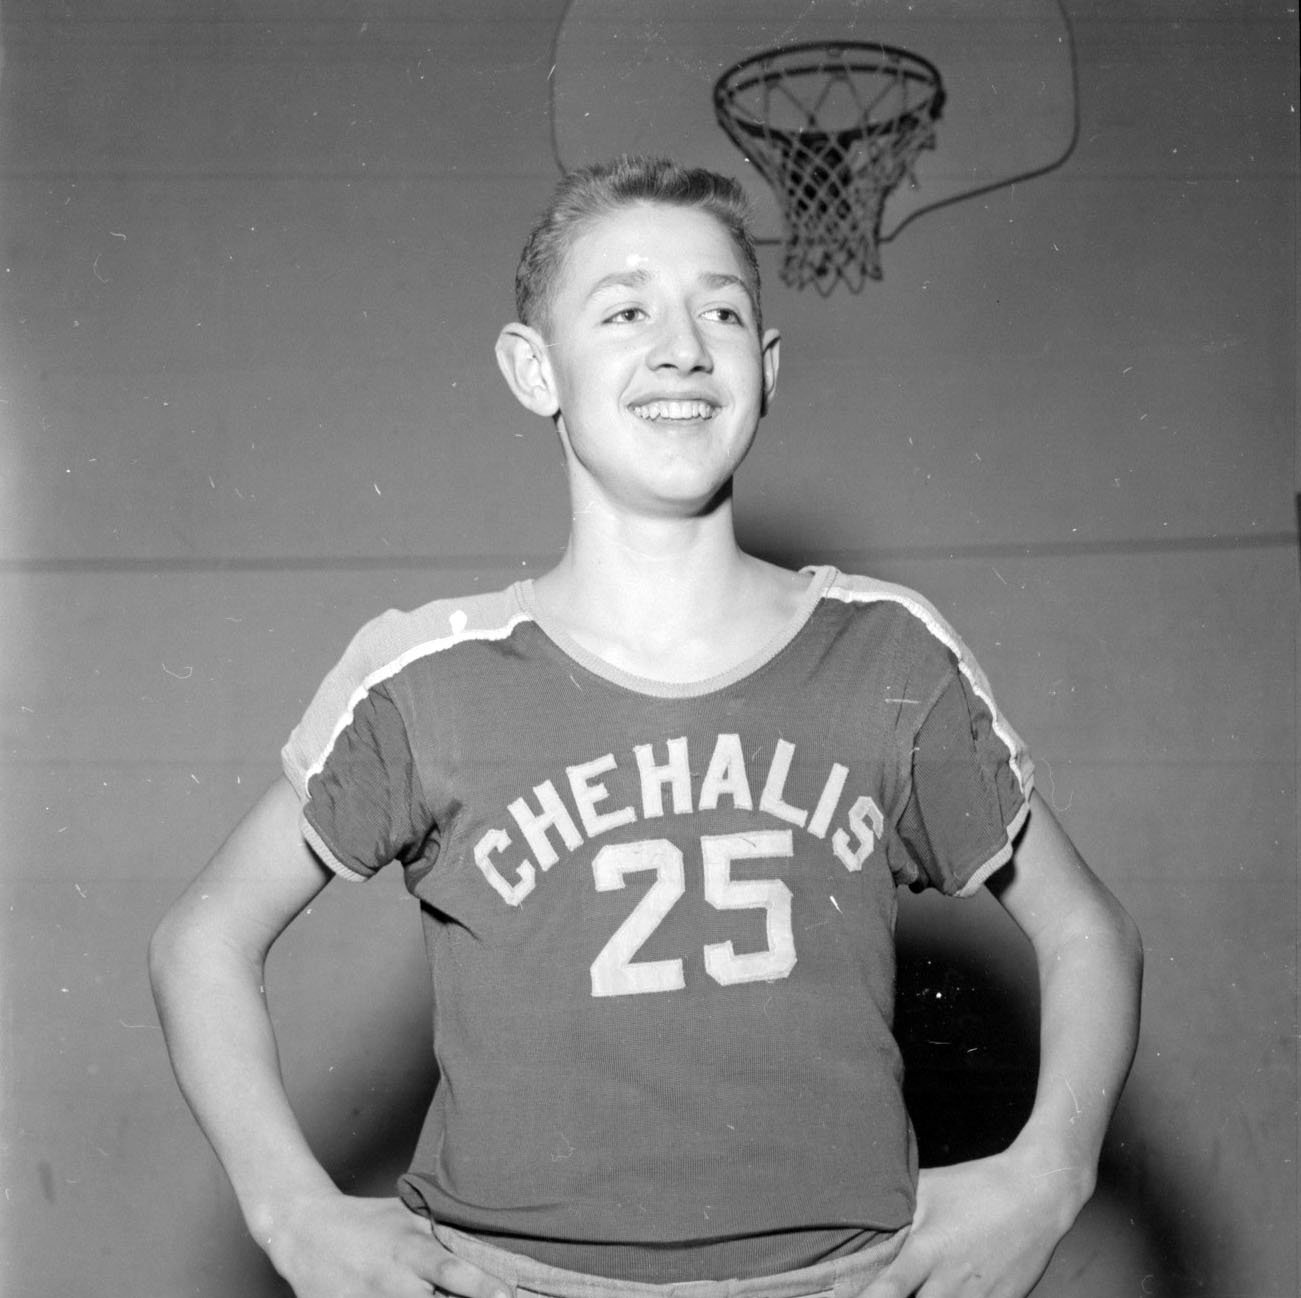 Today’s installment of photographs from The Chronicle’s recently digitized archives show images from the Chehalis High School basketball season in 1955 and 1956.  The Chronicle is working to convert decades worth of film into digital files in order to preserve them and share them with readers online and in each edition. Find more historical photos at chronline.com. If you have information on any of the photos published, please email details to news@chronline.com.